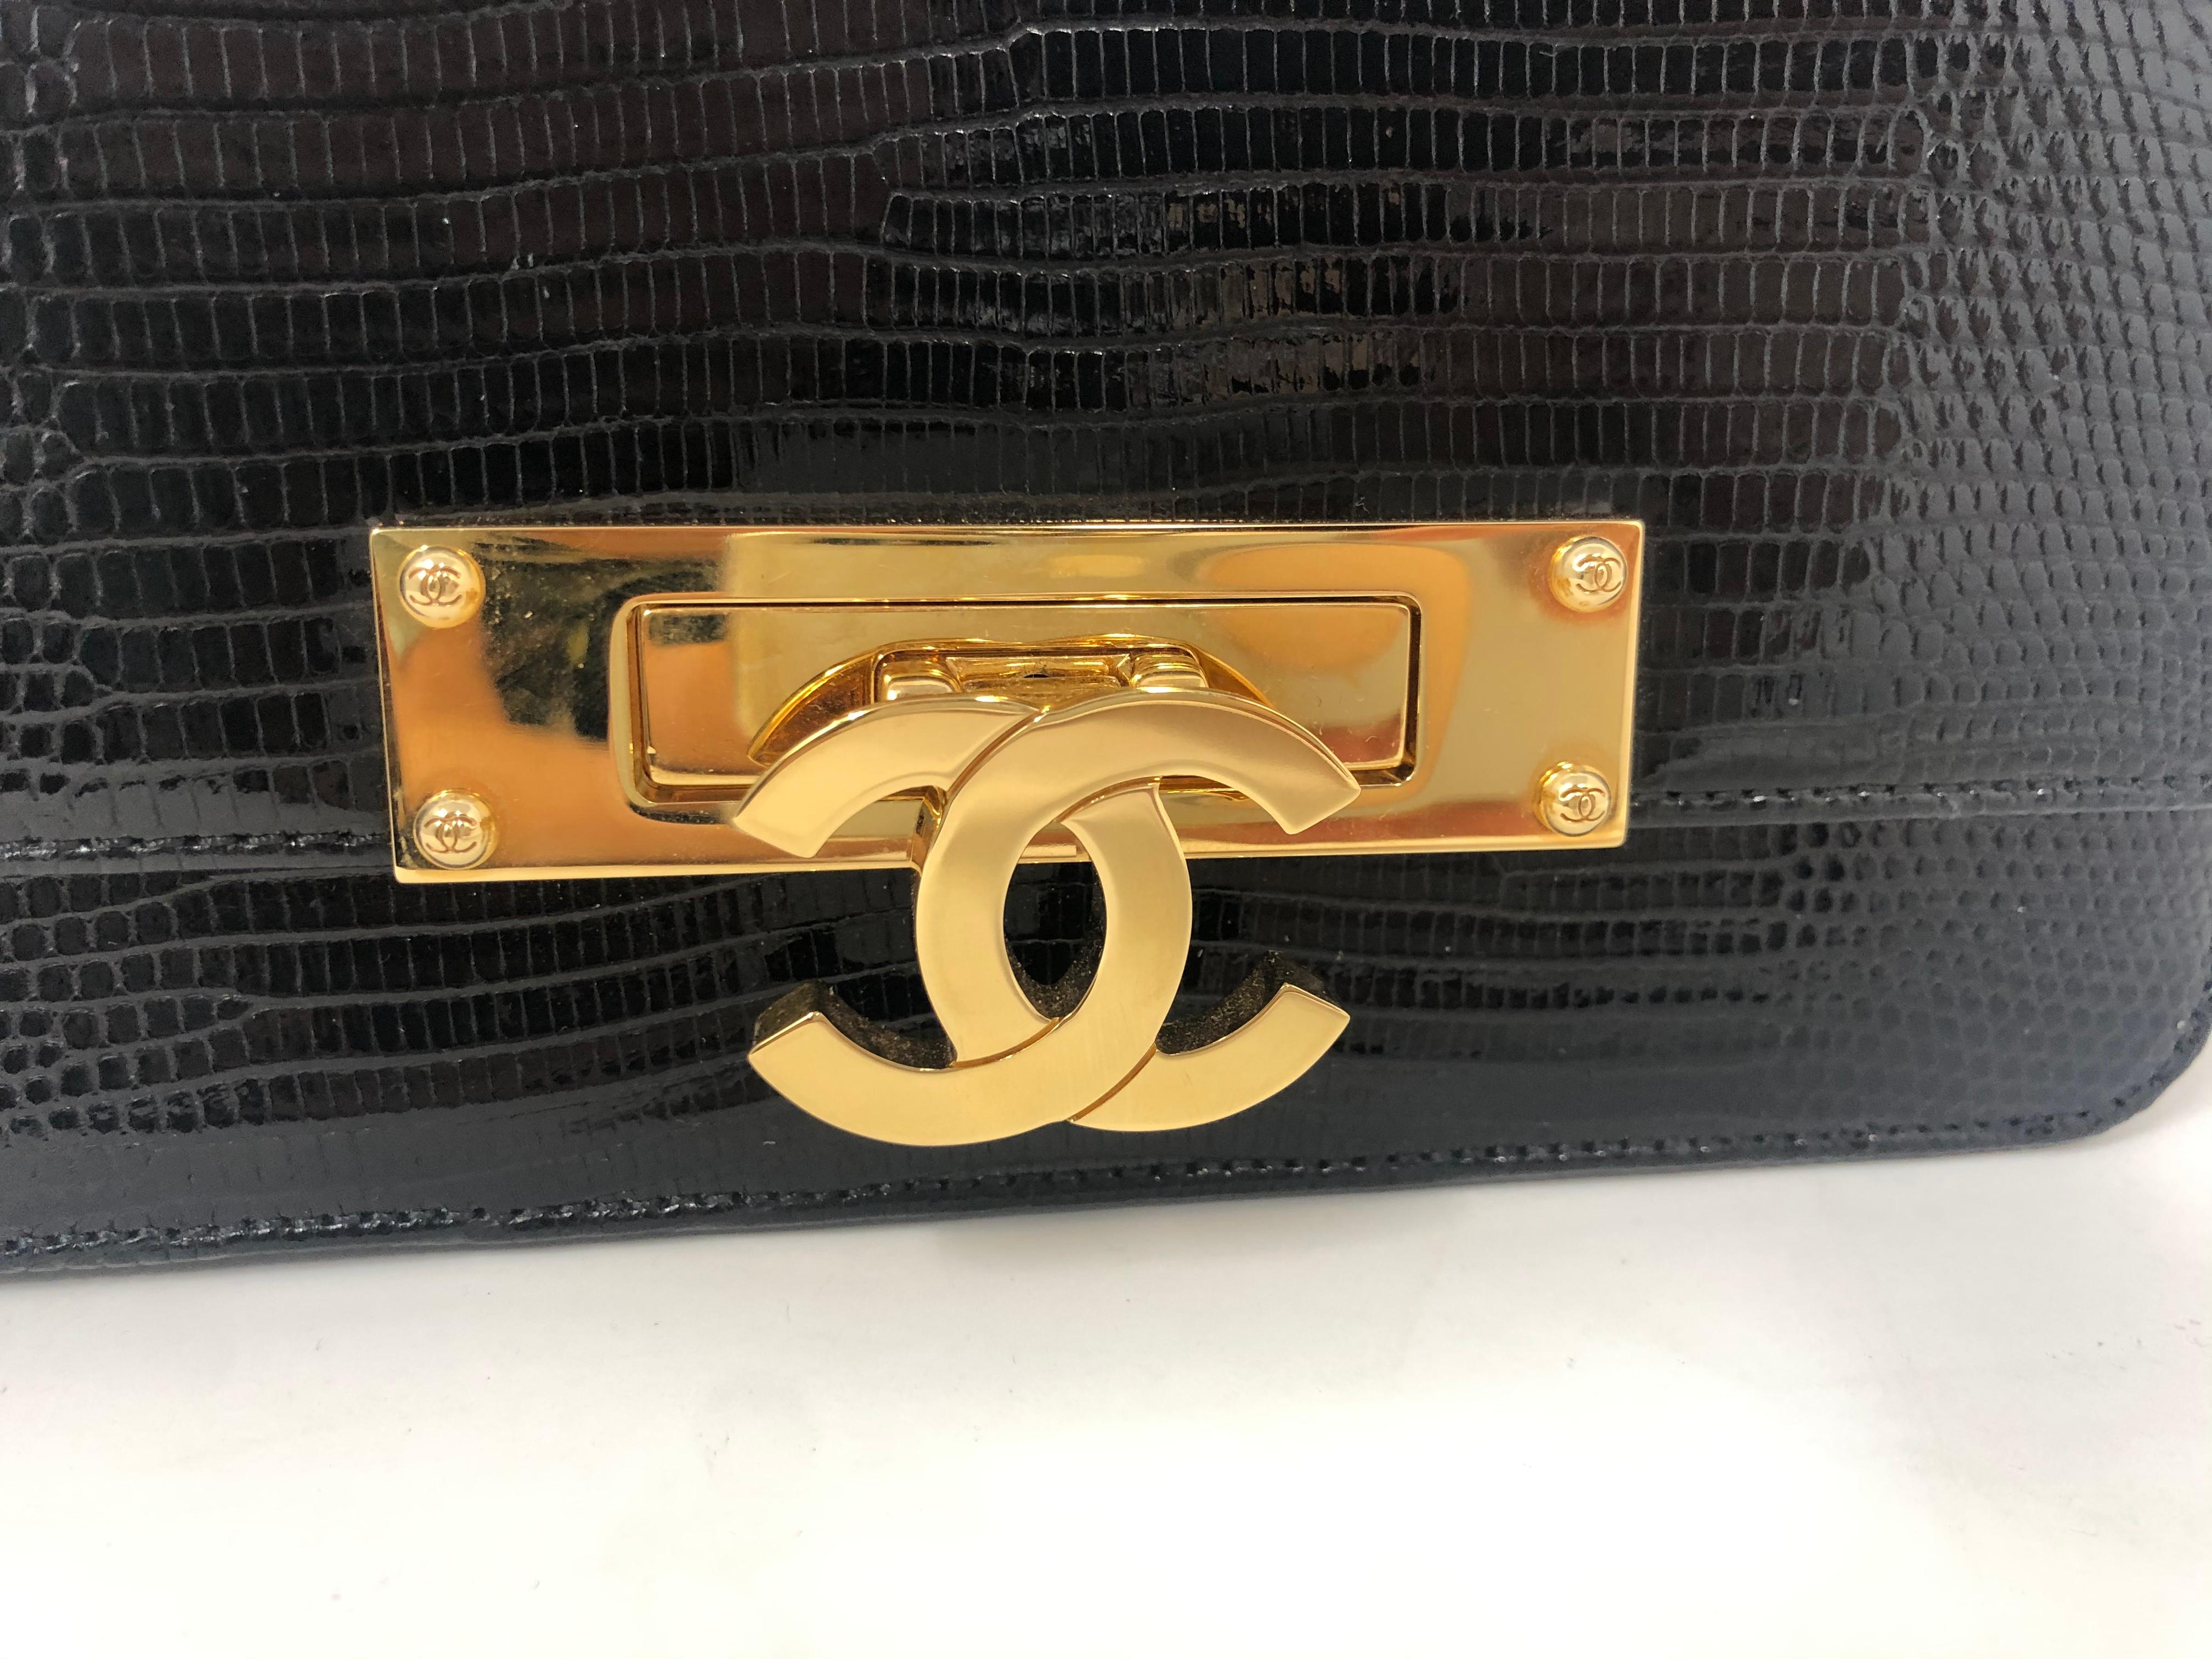 Chanel Alligator Exotic Leather Clutch with Strap. Gold chain strap with embossed leather. Can be worn as a crossbody bag or taken off and worn as a clutch. Brand new condition. Gold is shiny and new. Rare and limited. Don't miss out on this one.